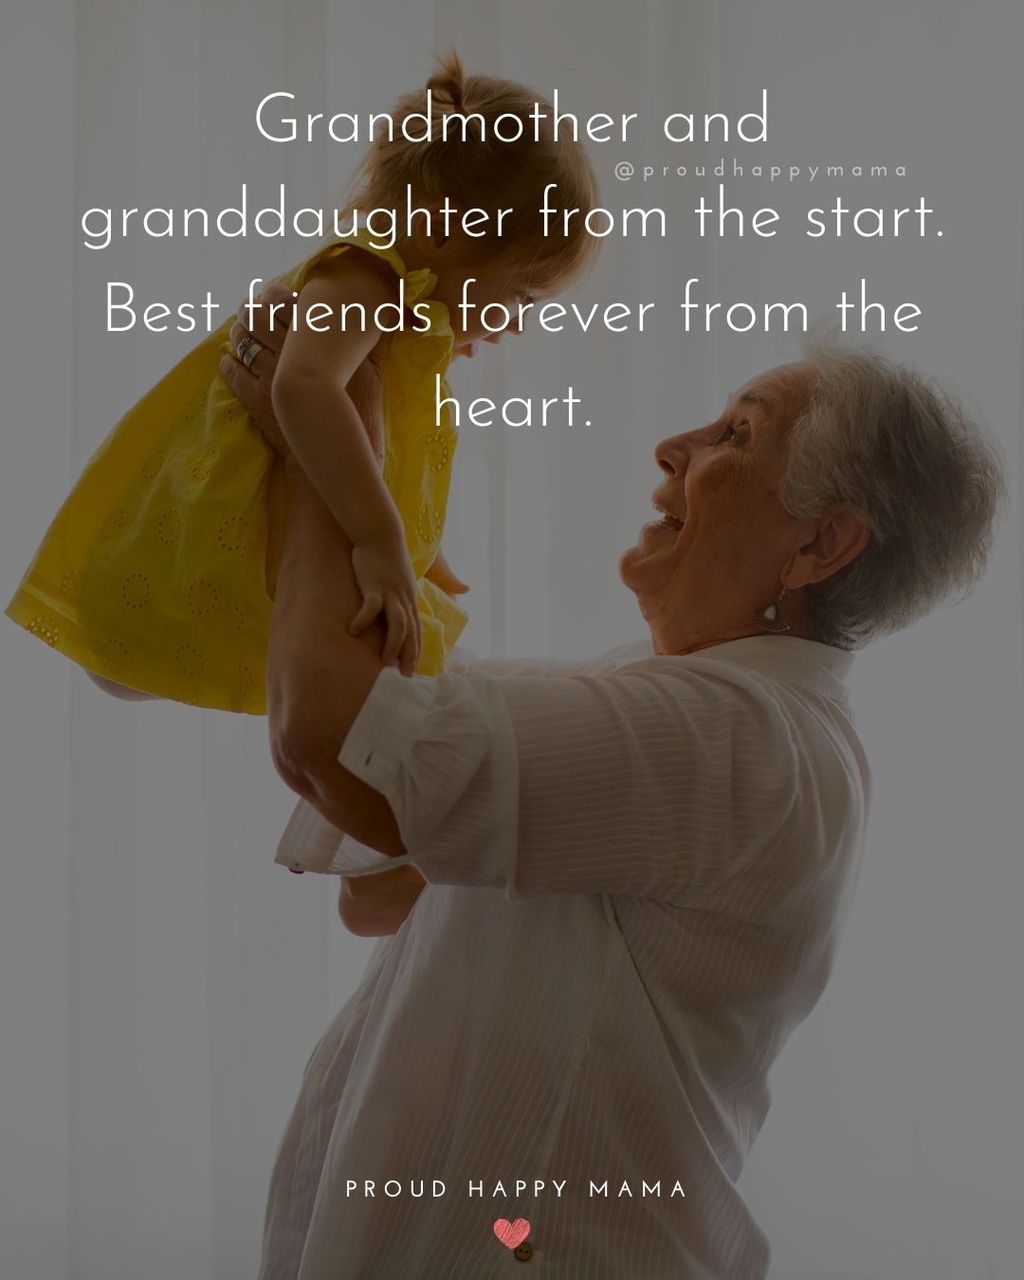 Granddaughter Quotes - Grandmother and granddaughter from the start. Best friends forever from the heart.